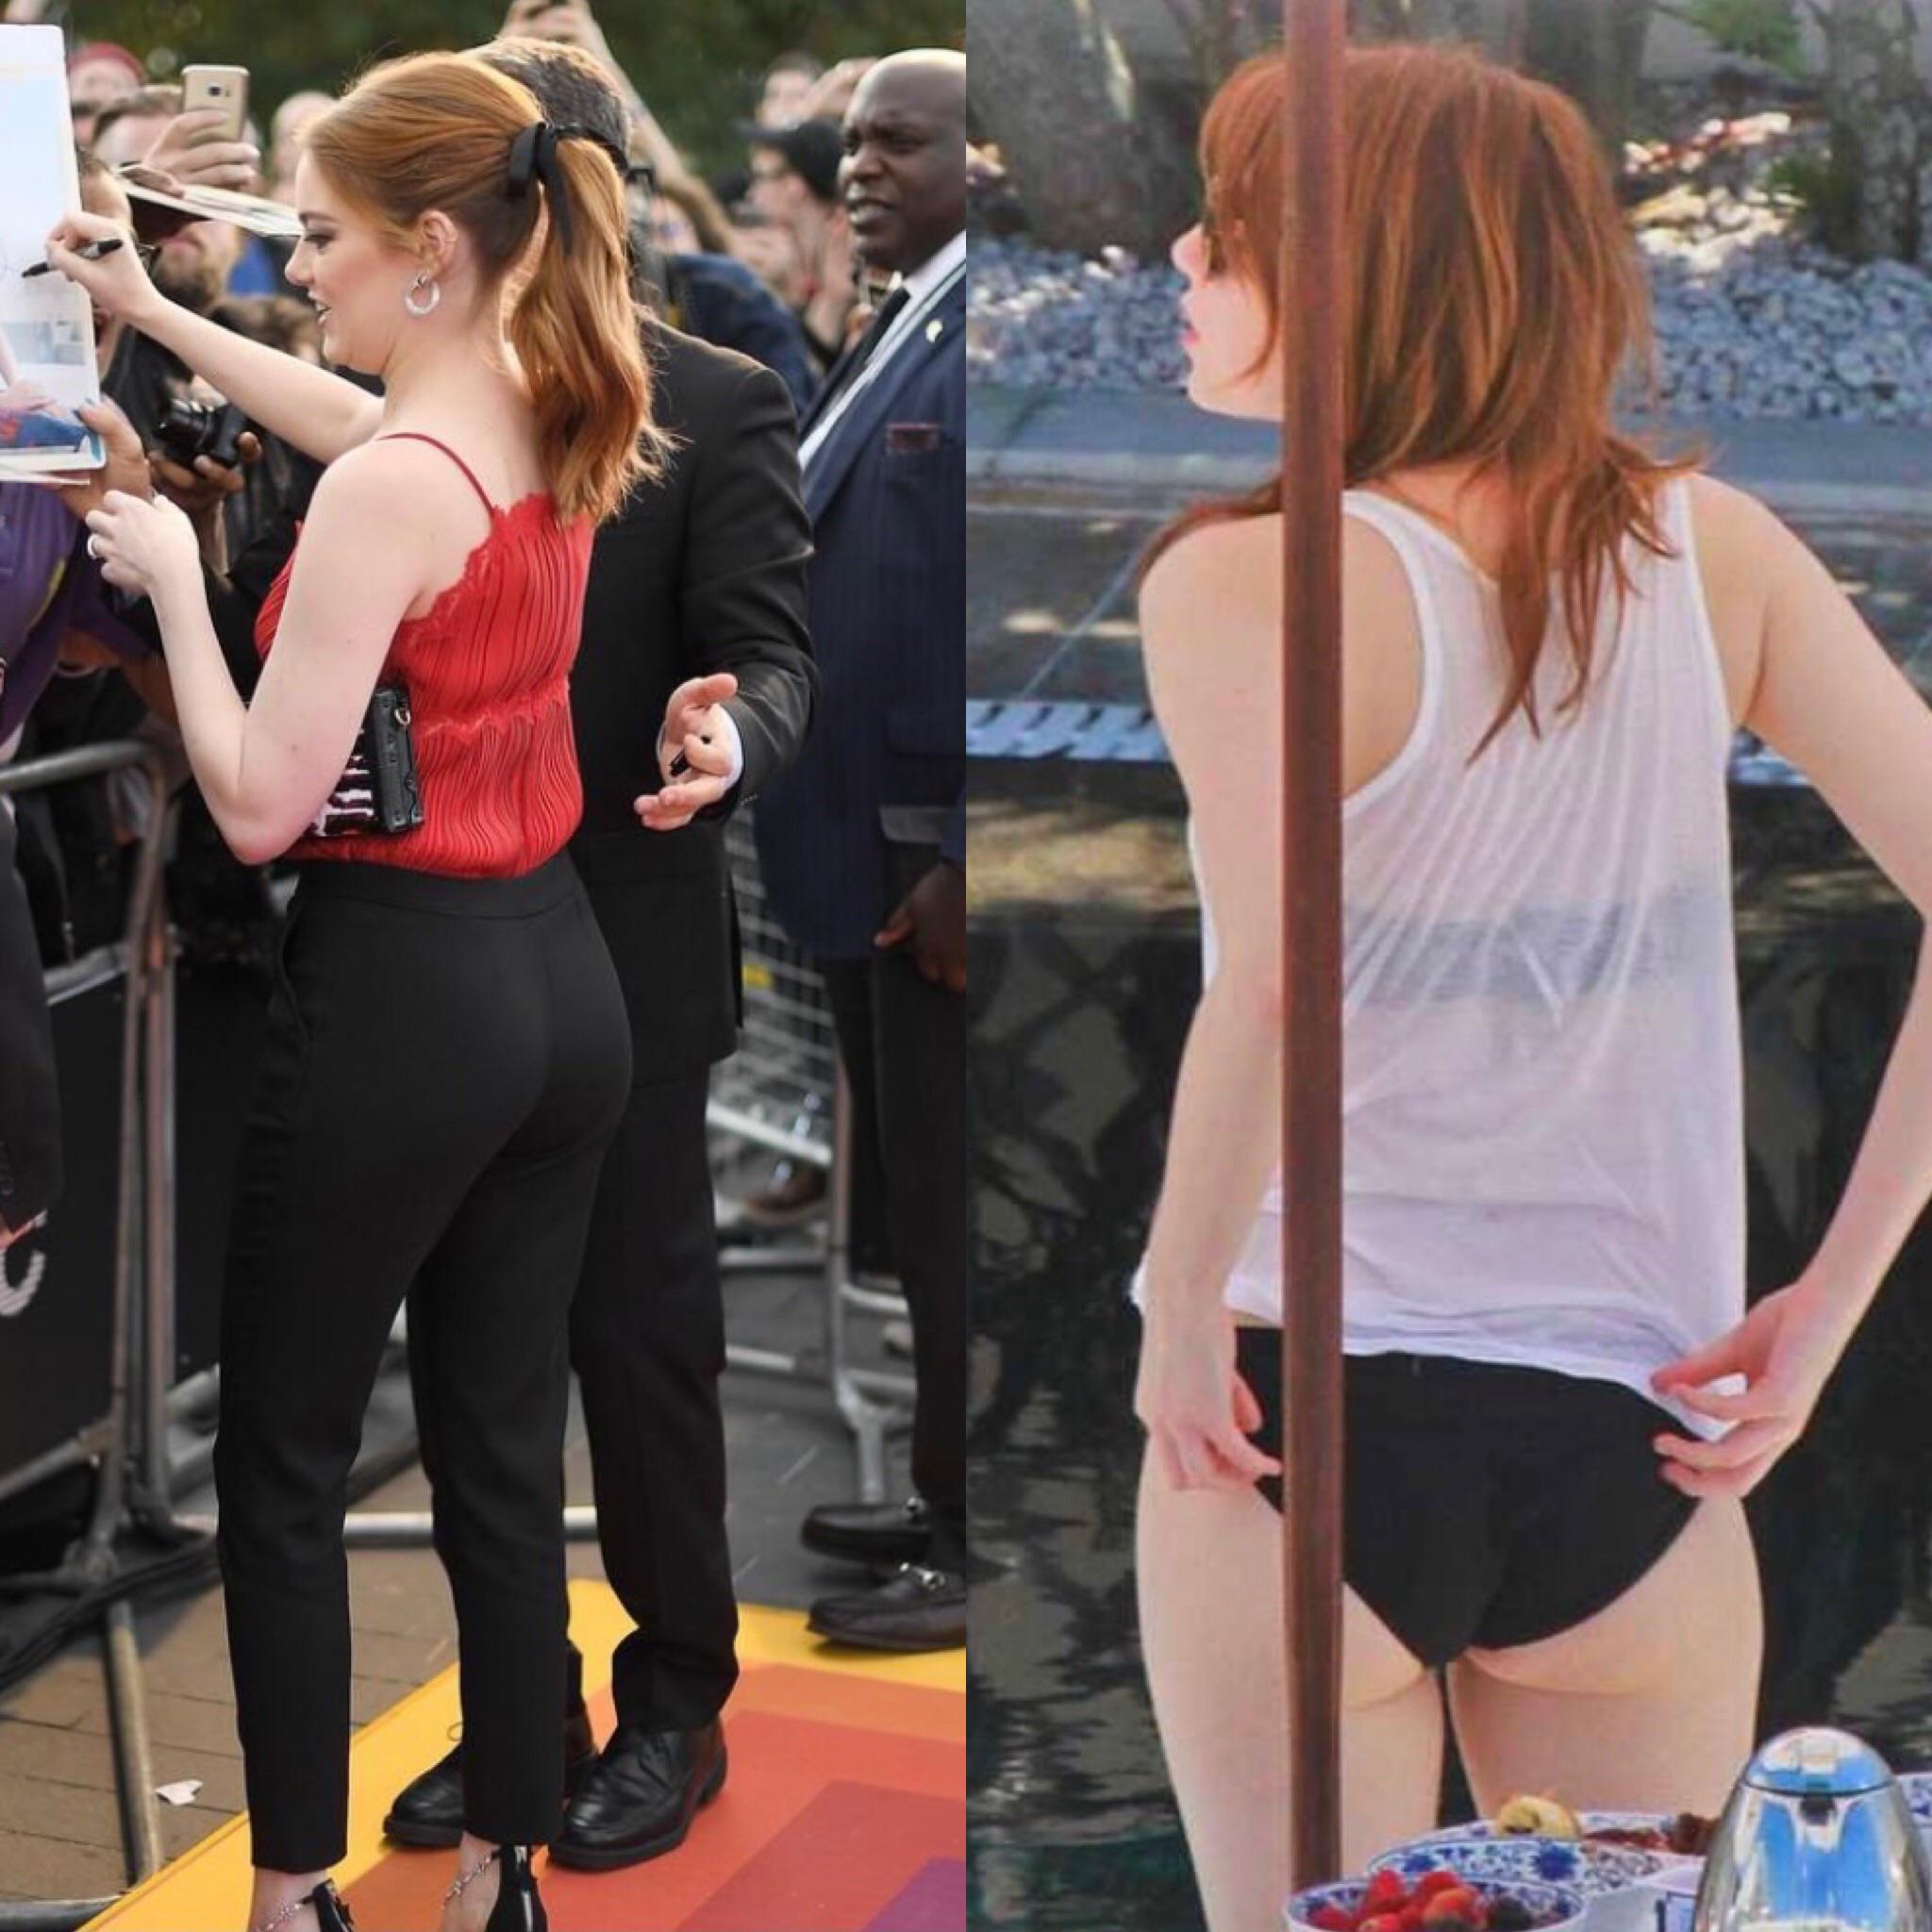 Emma Stones perfect ass was made for long and intense